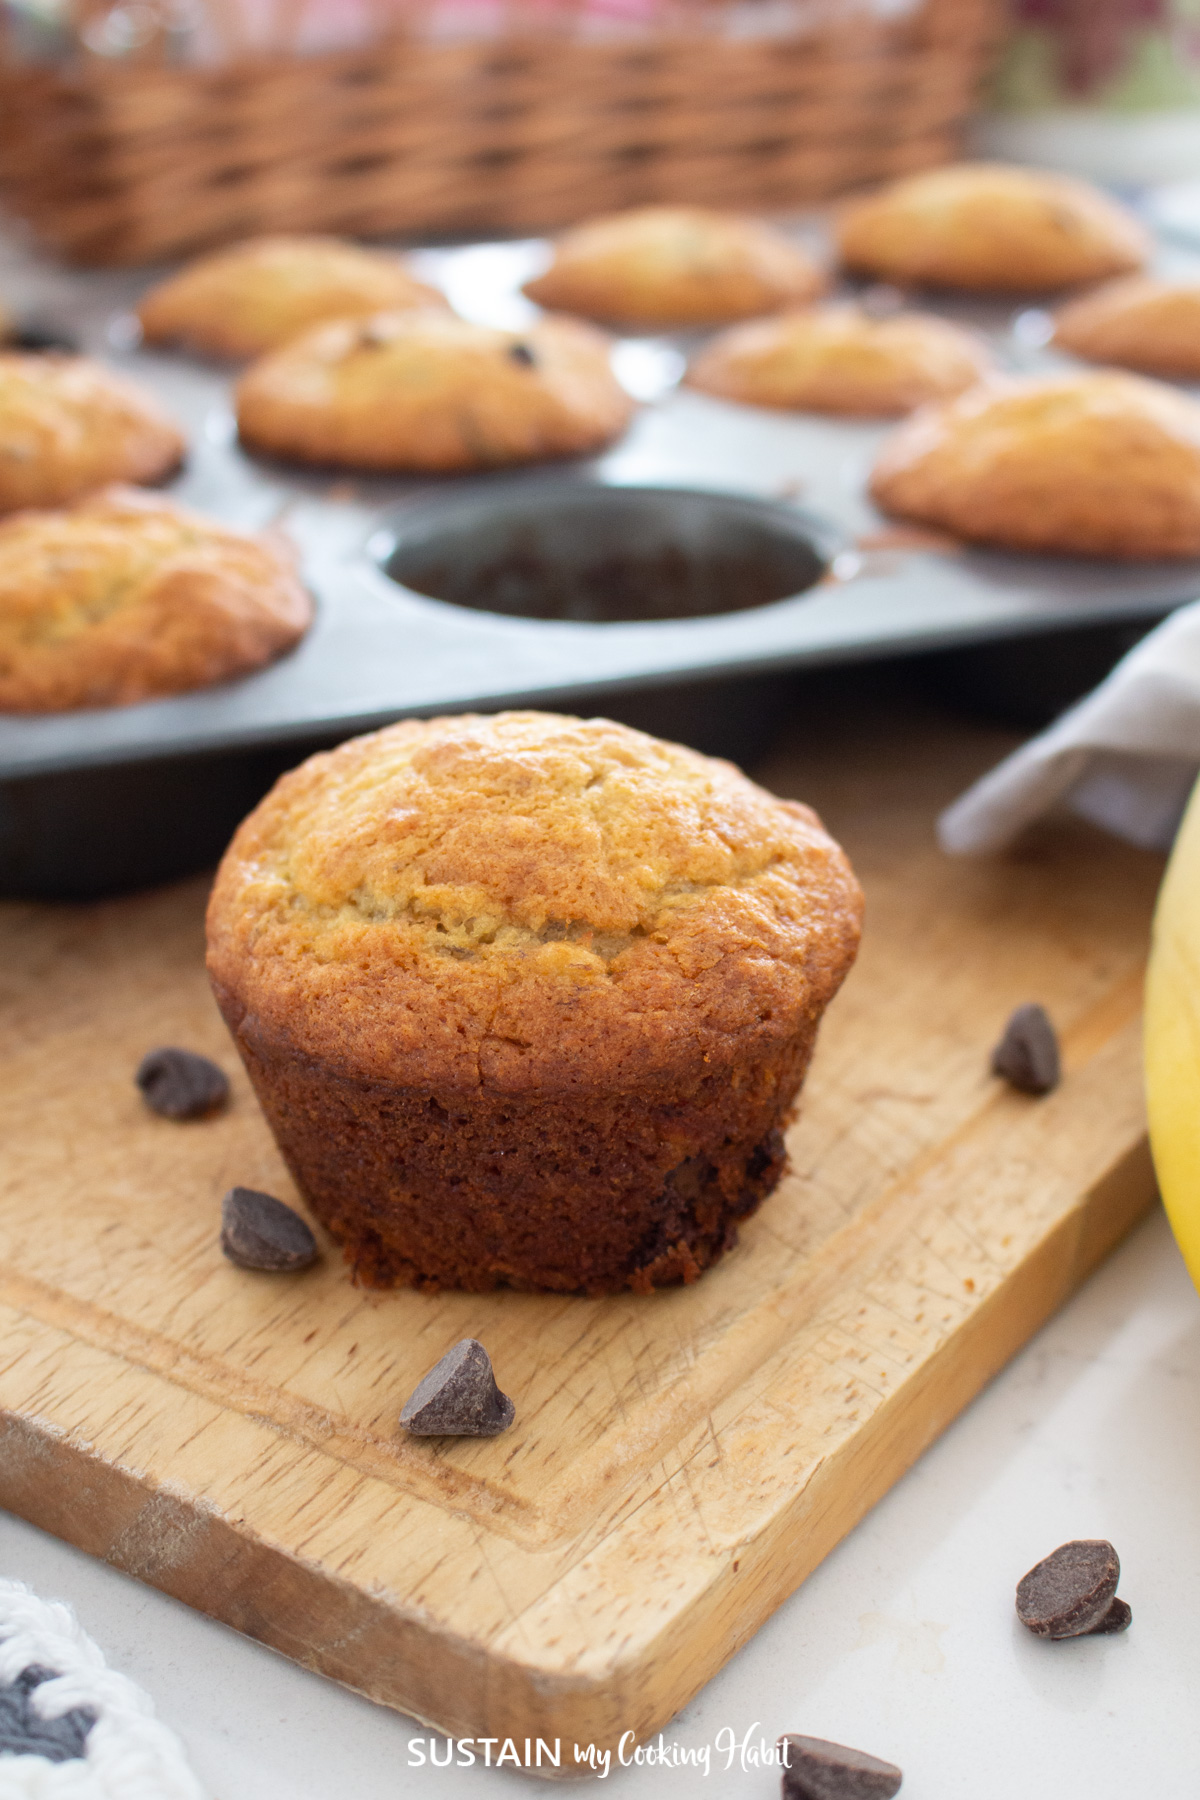 Banana chocolate chip muffin next to a pan of muffins and chocolate chips.